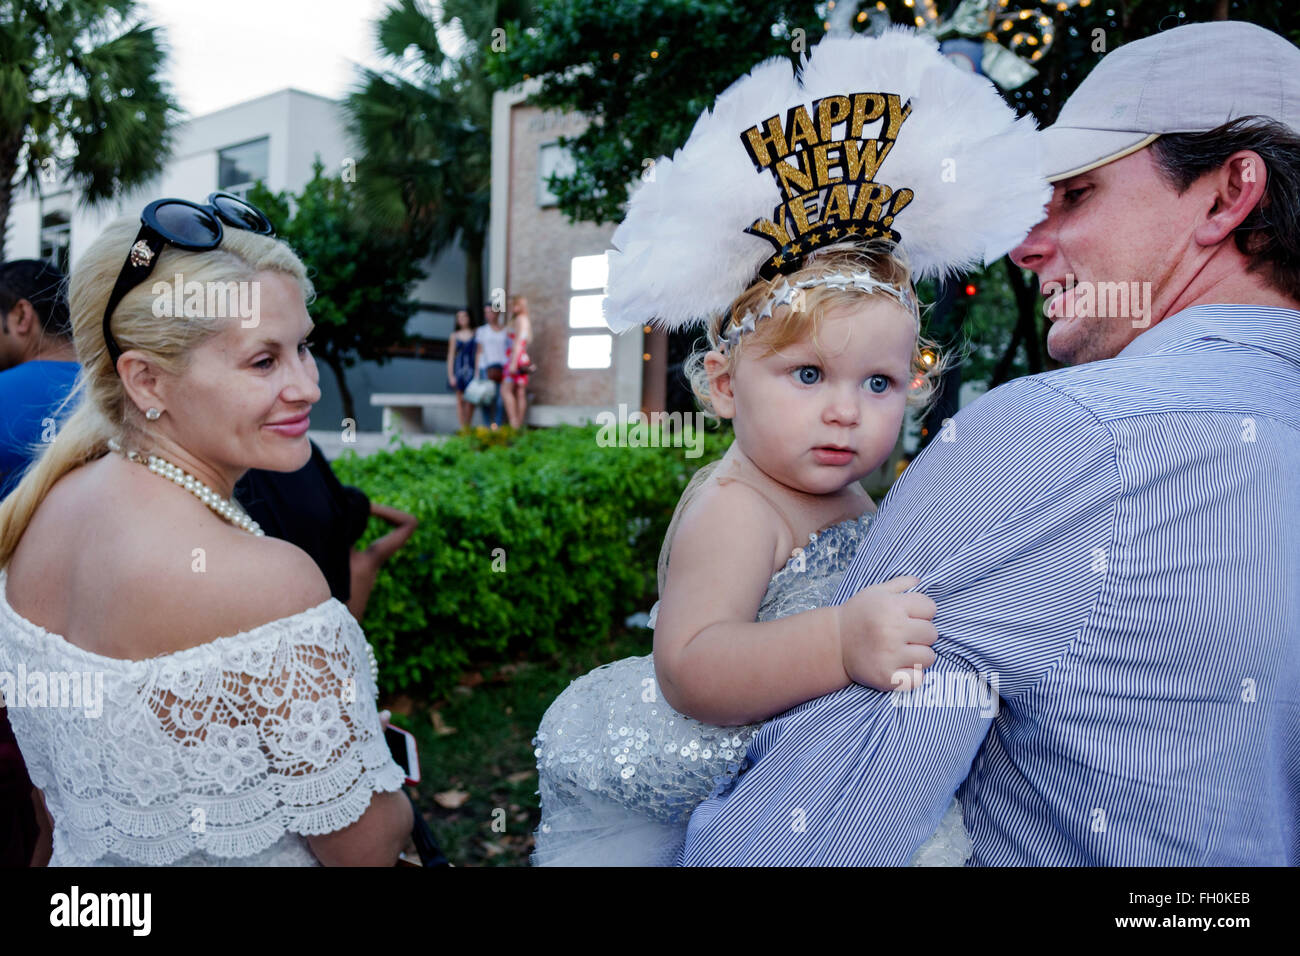 Miami Beach Florida,Ocean Drive,New Year's Eve,family families parent parents child children,mother father,girl girls,youngster,female kids children d Stock Photo